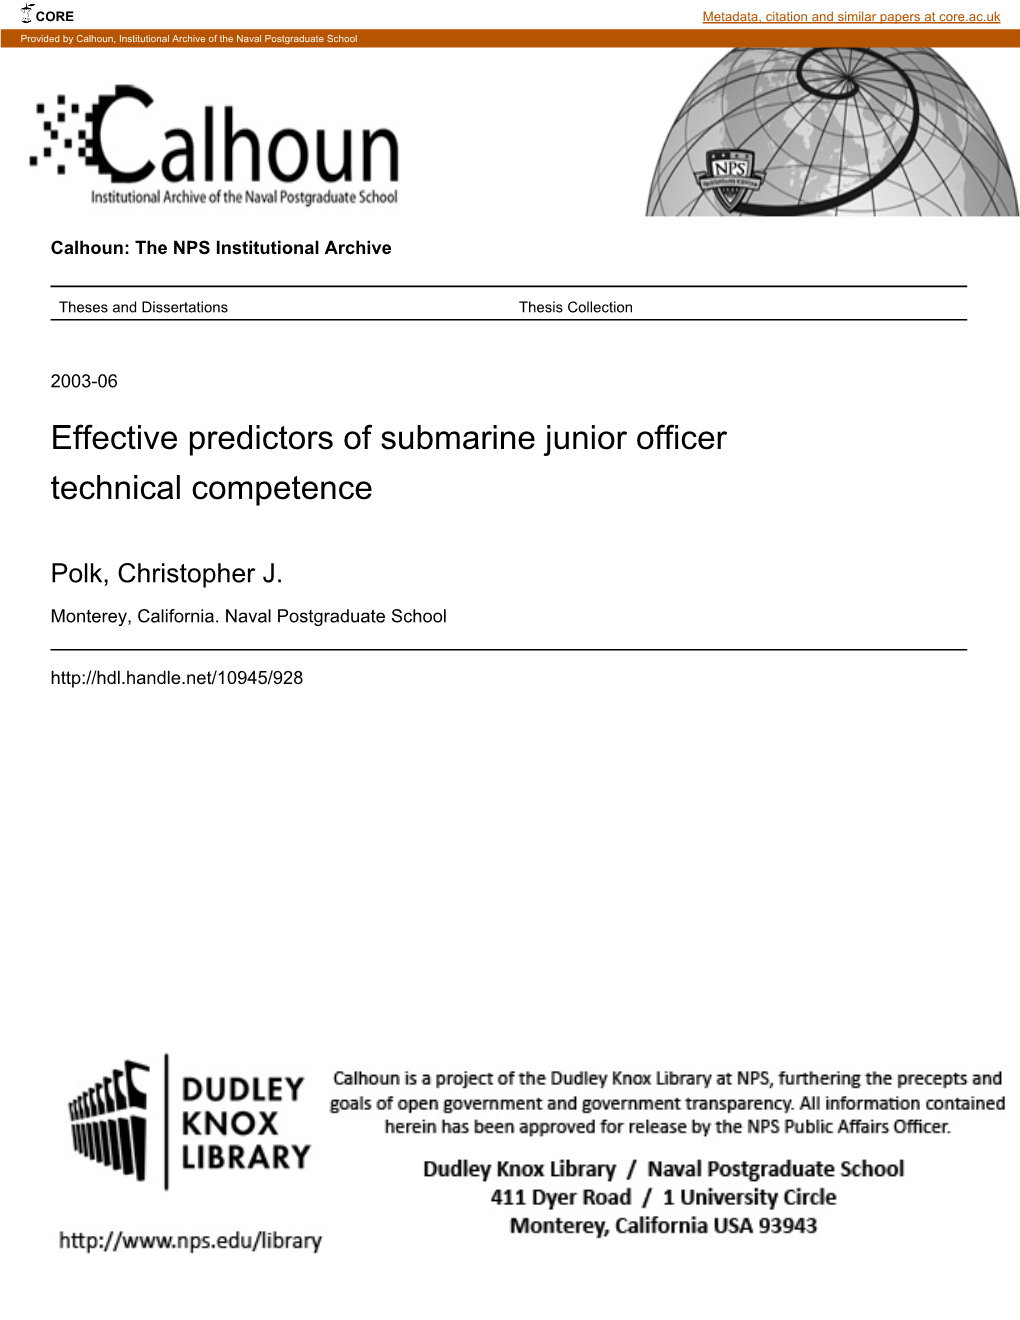 Effective Predictors of Submarine Junior Officer Technical Competence